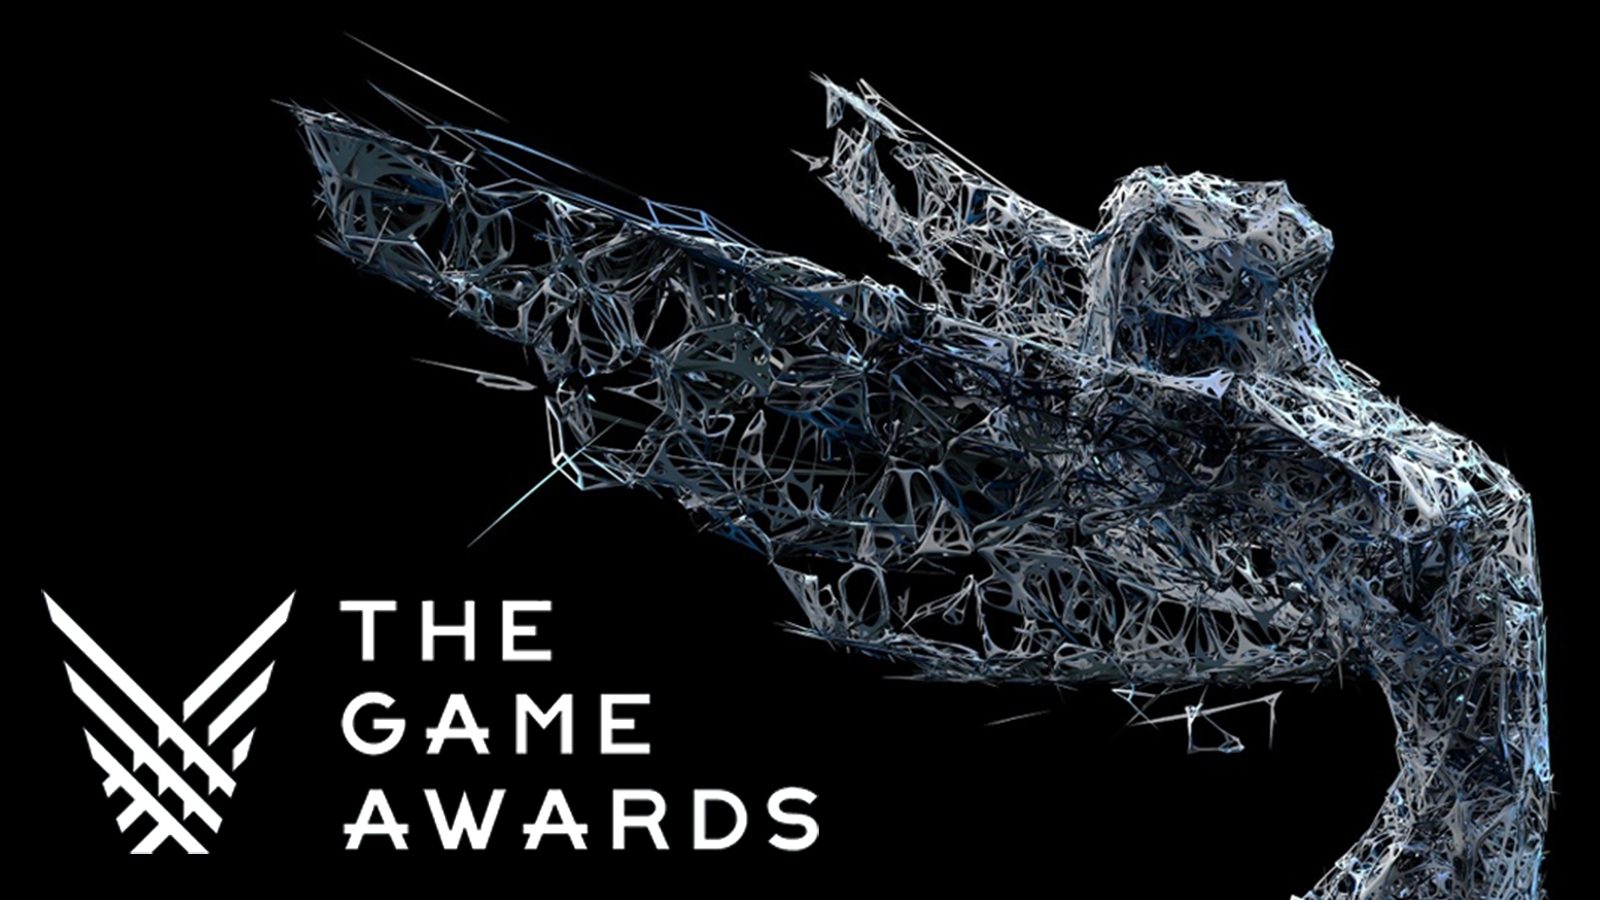 The Game Awards 2018: How to Watch, Categories, Nominees, and more